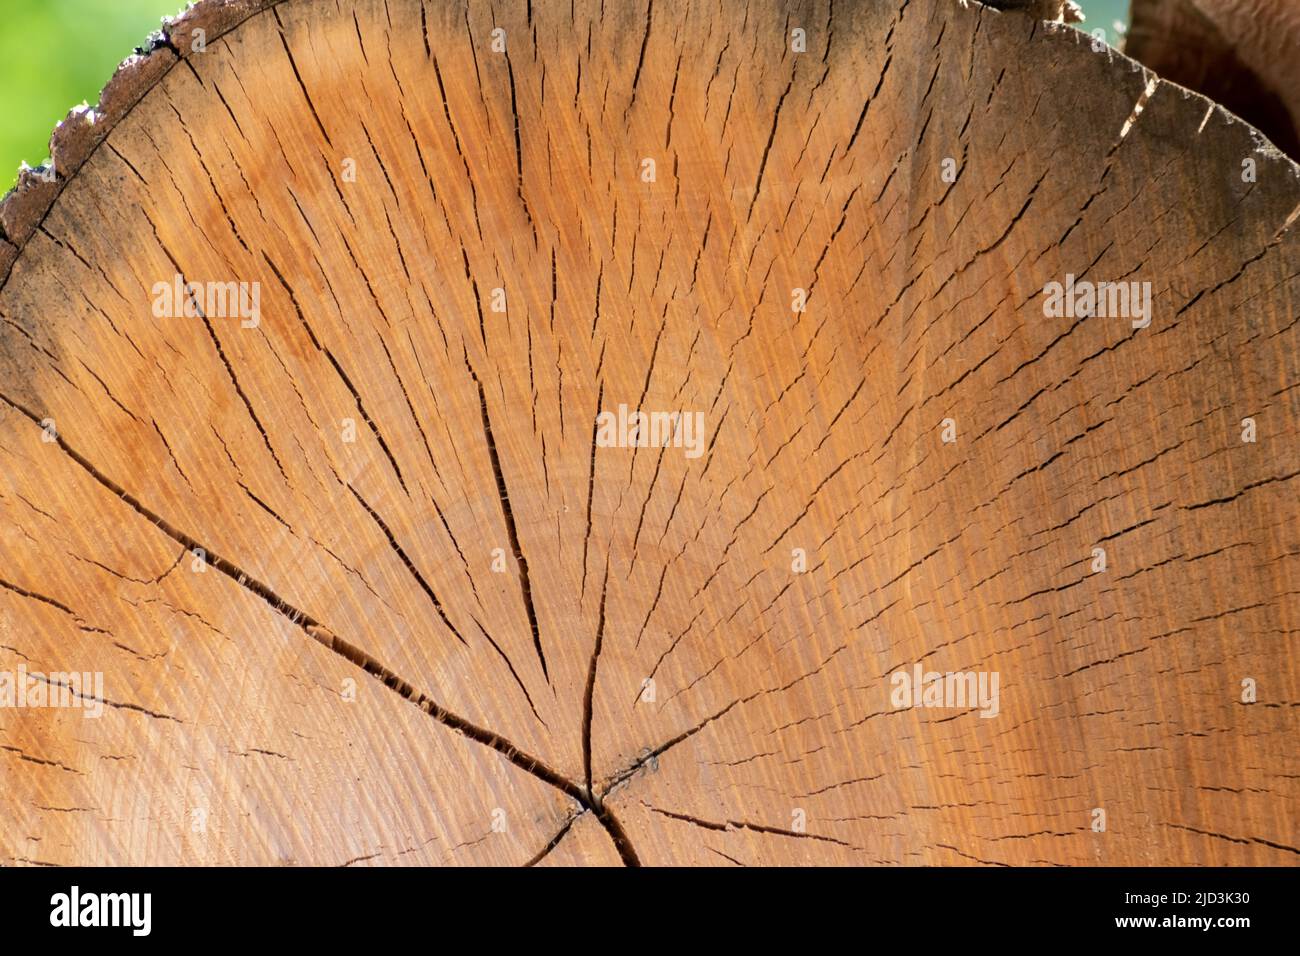 Cut tree disc of construction wood after deforestation stacked as woodpile show annual rings and the age of trees for lumber and timber industry Stock Photo